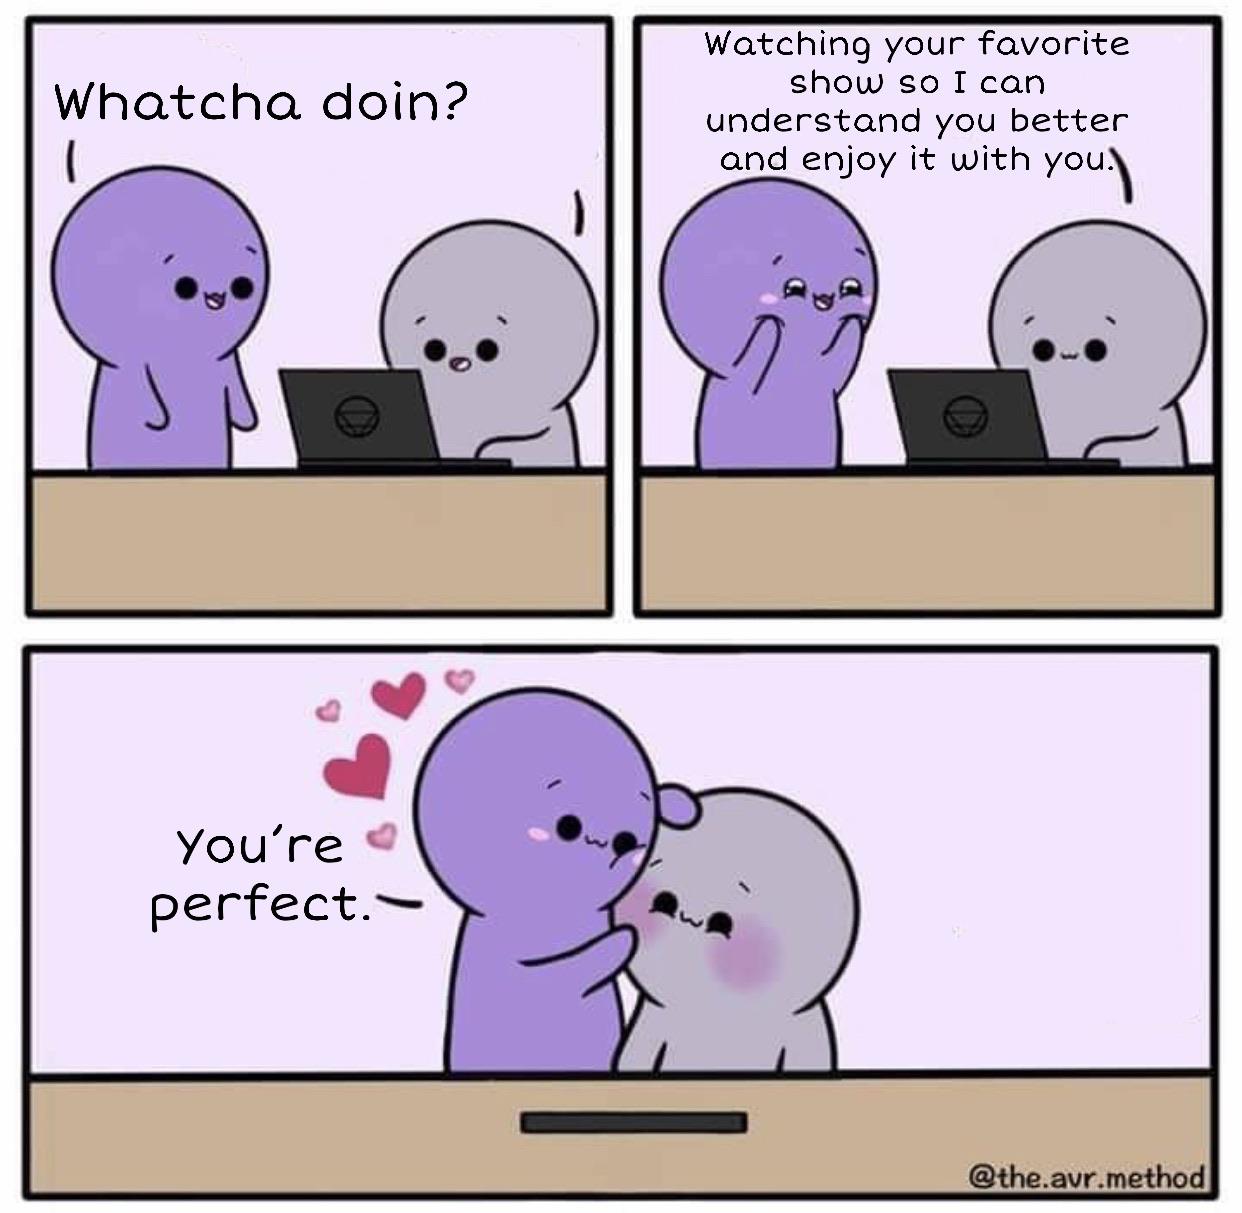 Wholesome memes, Warhammer, JoJo, Isabella, Titan, TV Wholesome Memes Wholesome memes, Warhammer, JoJo, Isabella, Titan, TV text: Whatcha doin? You're perfect.-— Watching your favorite show so I can understand you better and enjoy it with you. @the.avr.method 